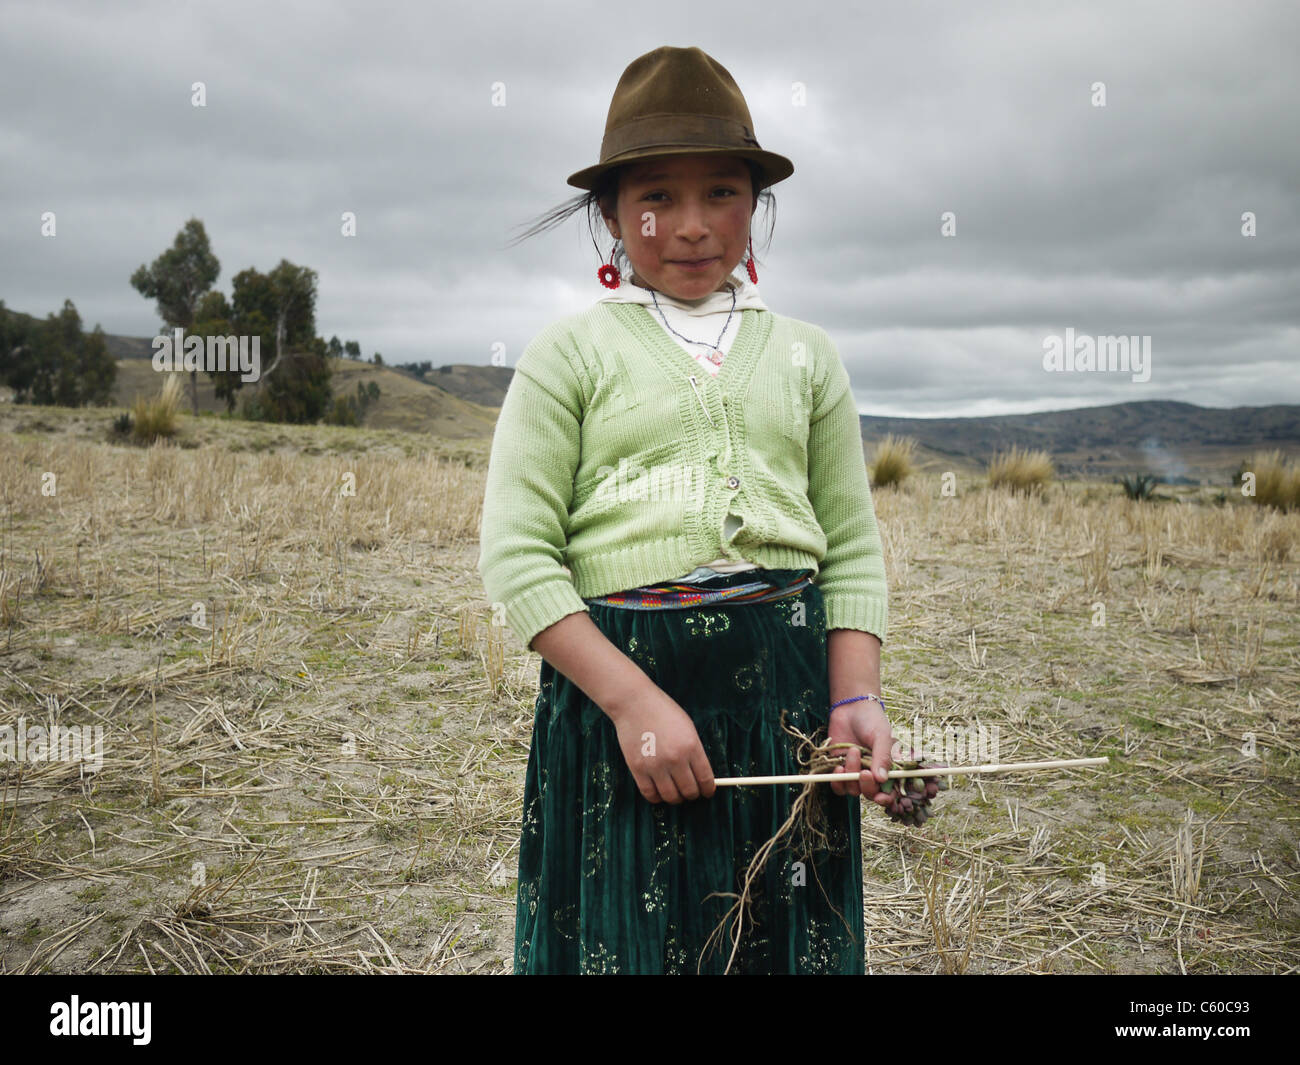 Portrait of an indigenous girl high in the Andes Mountains of South America. Stock Photo